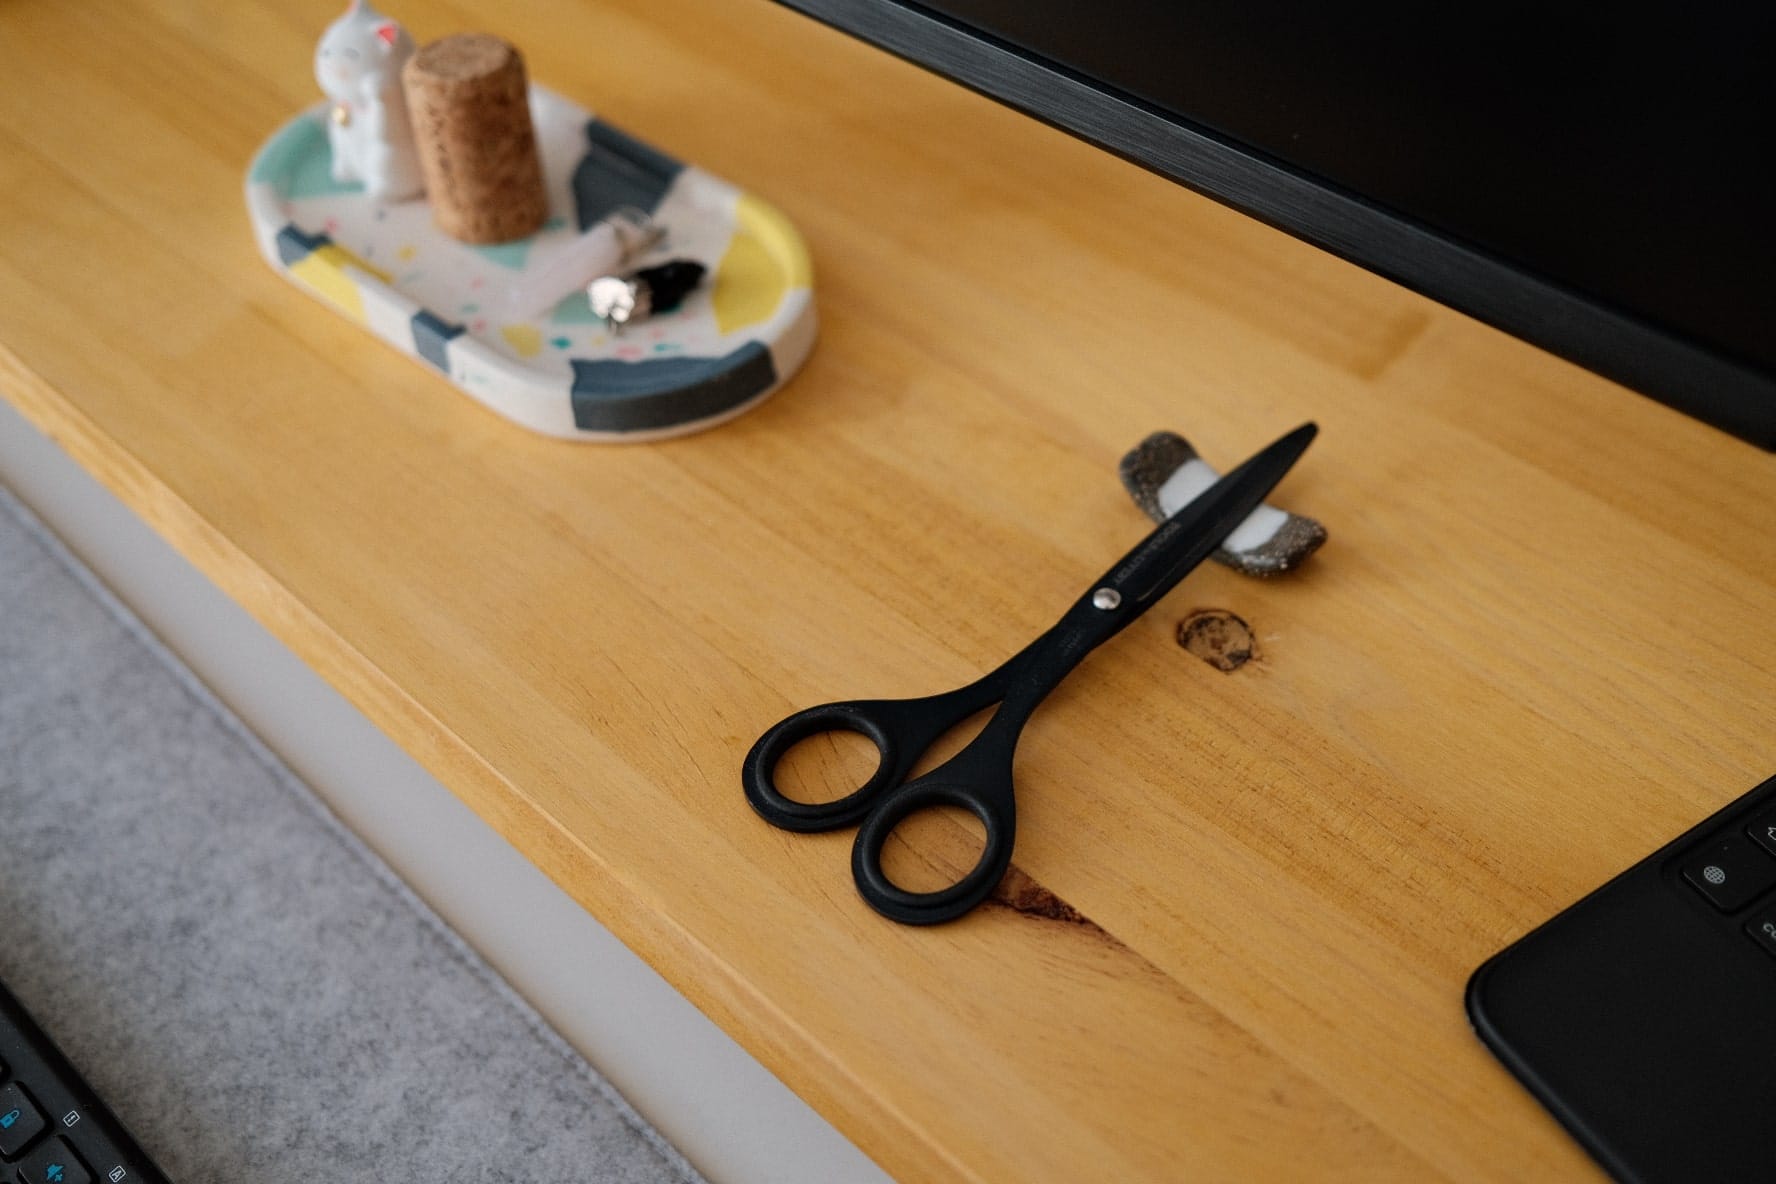  A close-up of a wooden desk with a pair of black scissors, a cork stopper, and a decorative tray with a small figurine